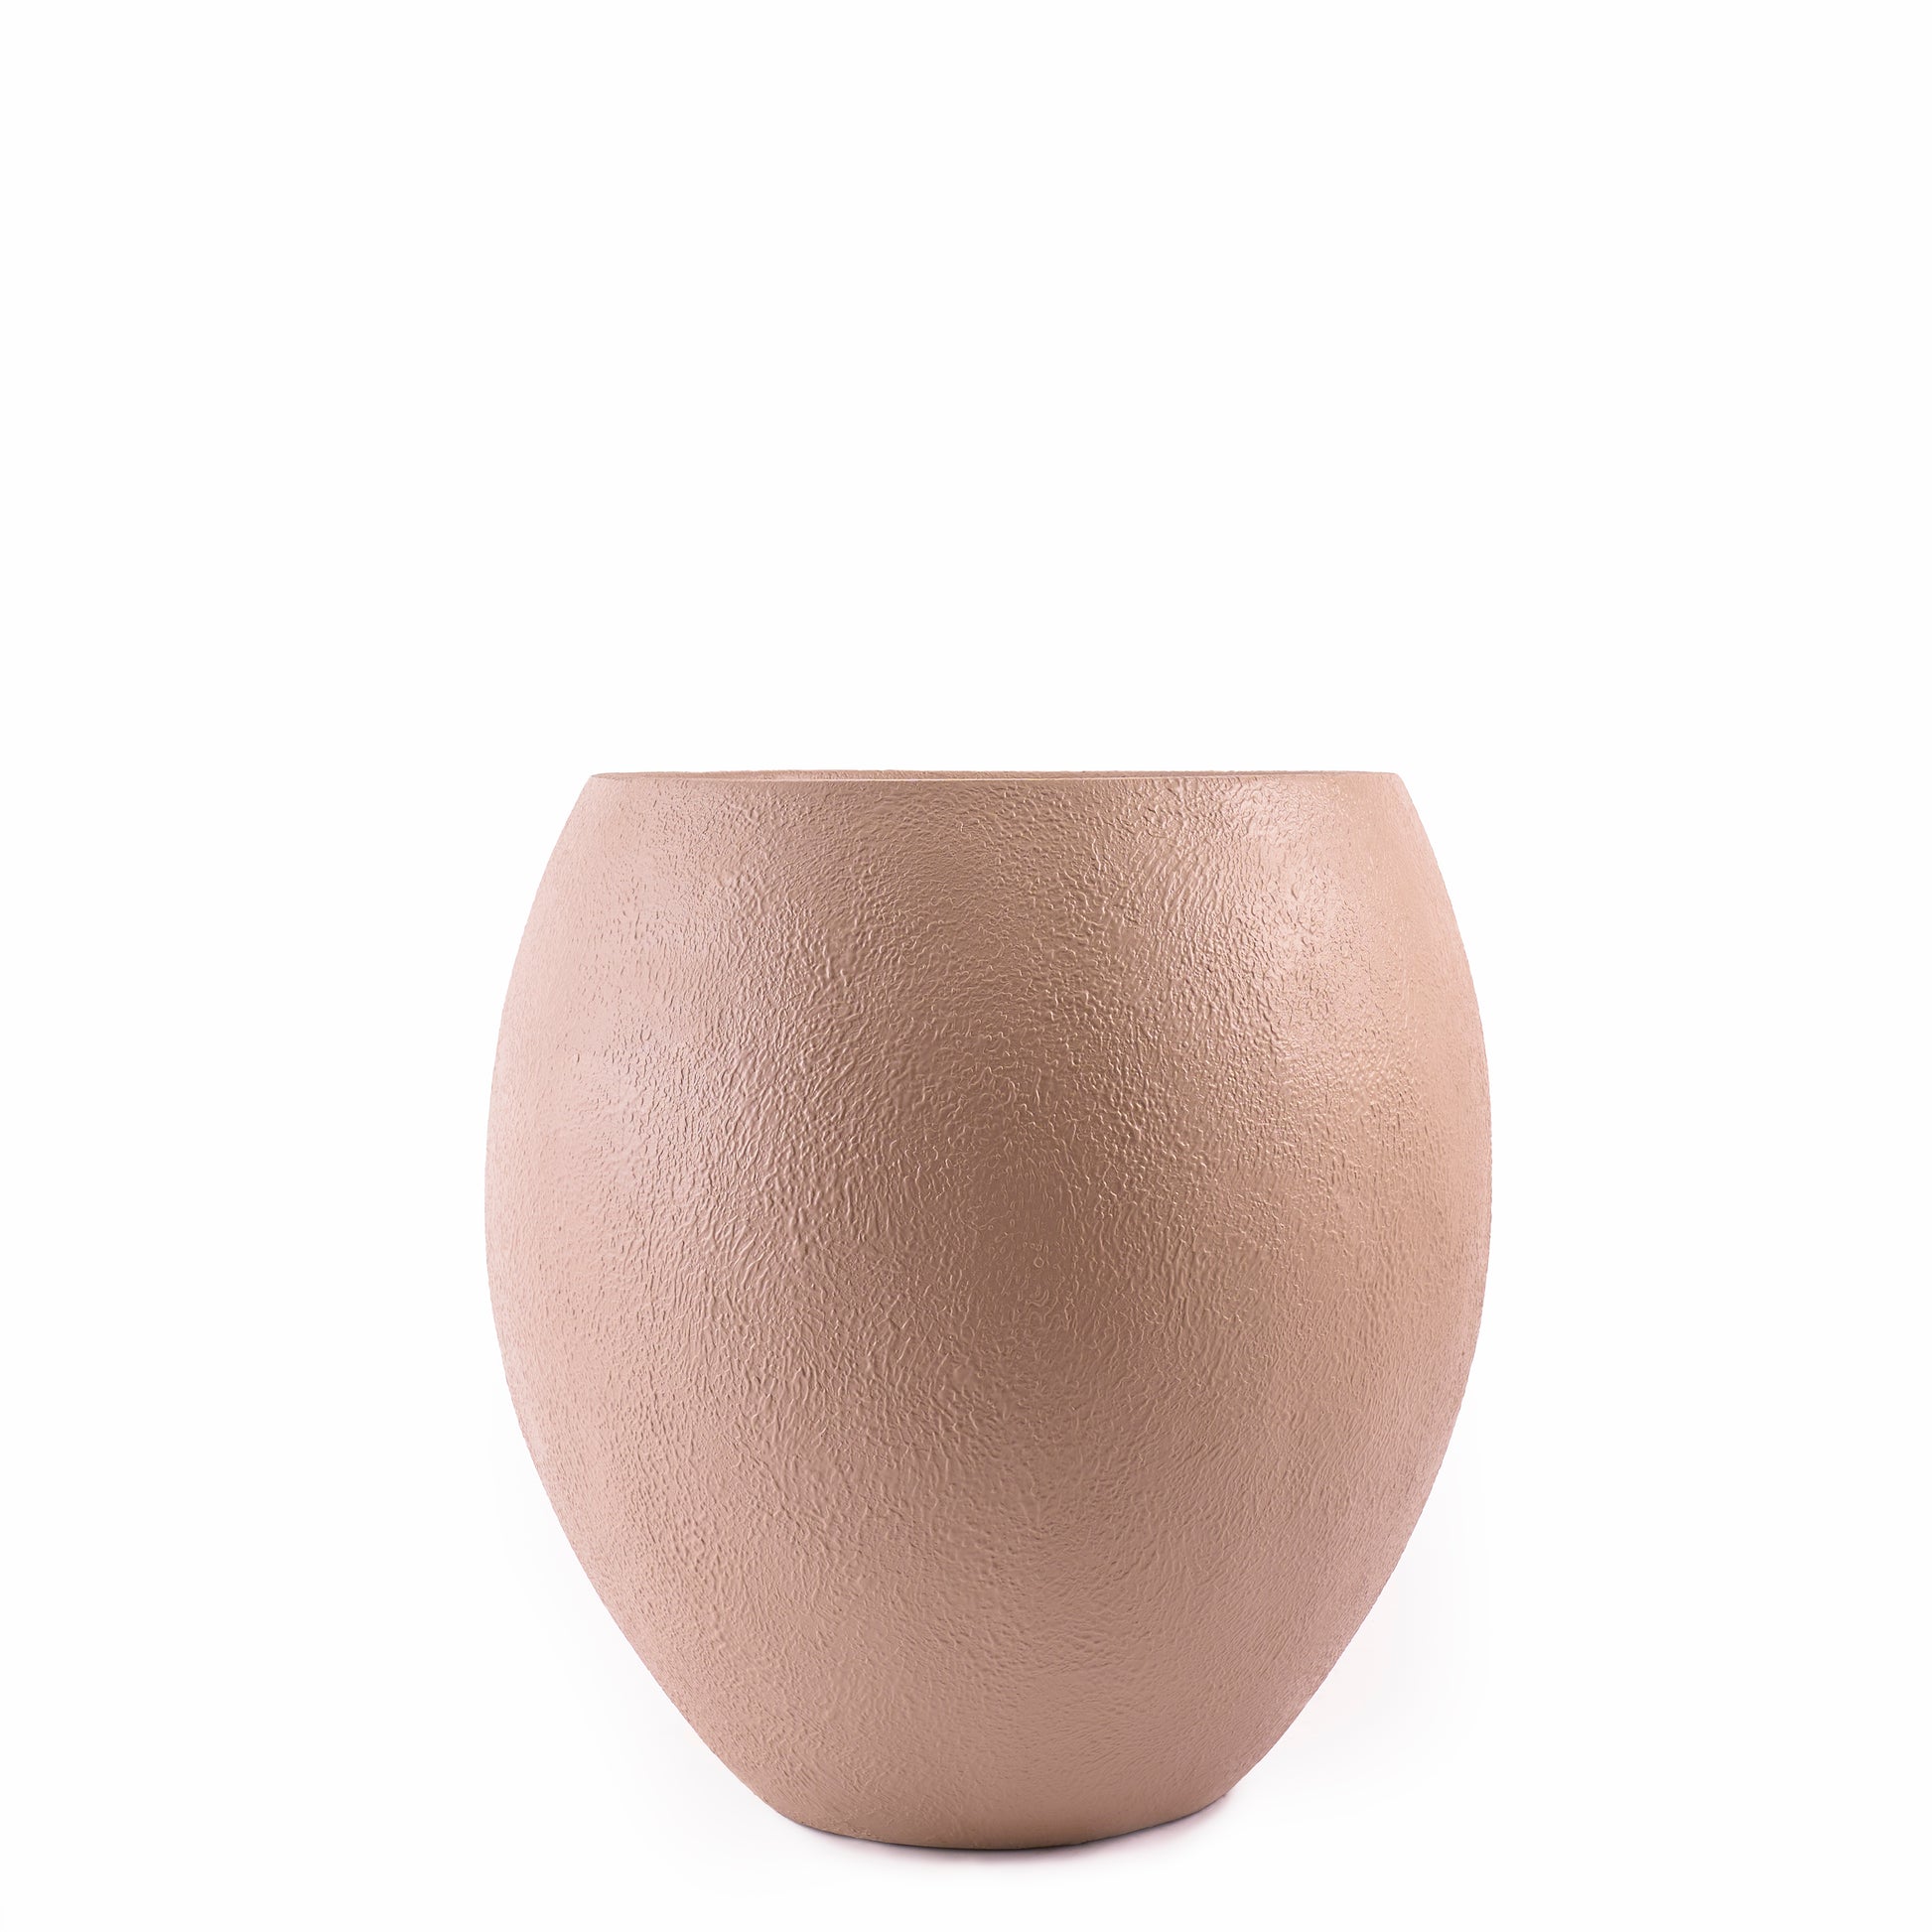 Cora FRP Round Planter by Studio Palasa is the perfect indoor plant pot for anyone looking for a living room planter or balcony planter. This big planter is made from FRP and light weight and easy to maintain